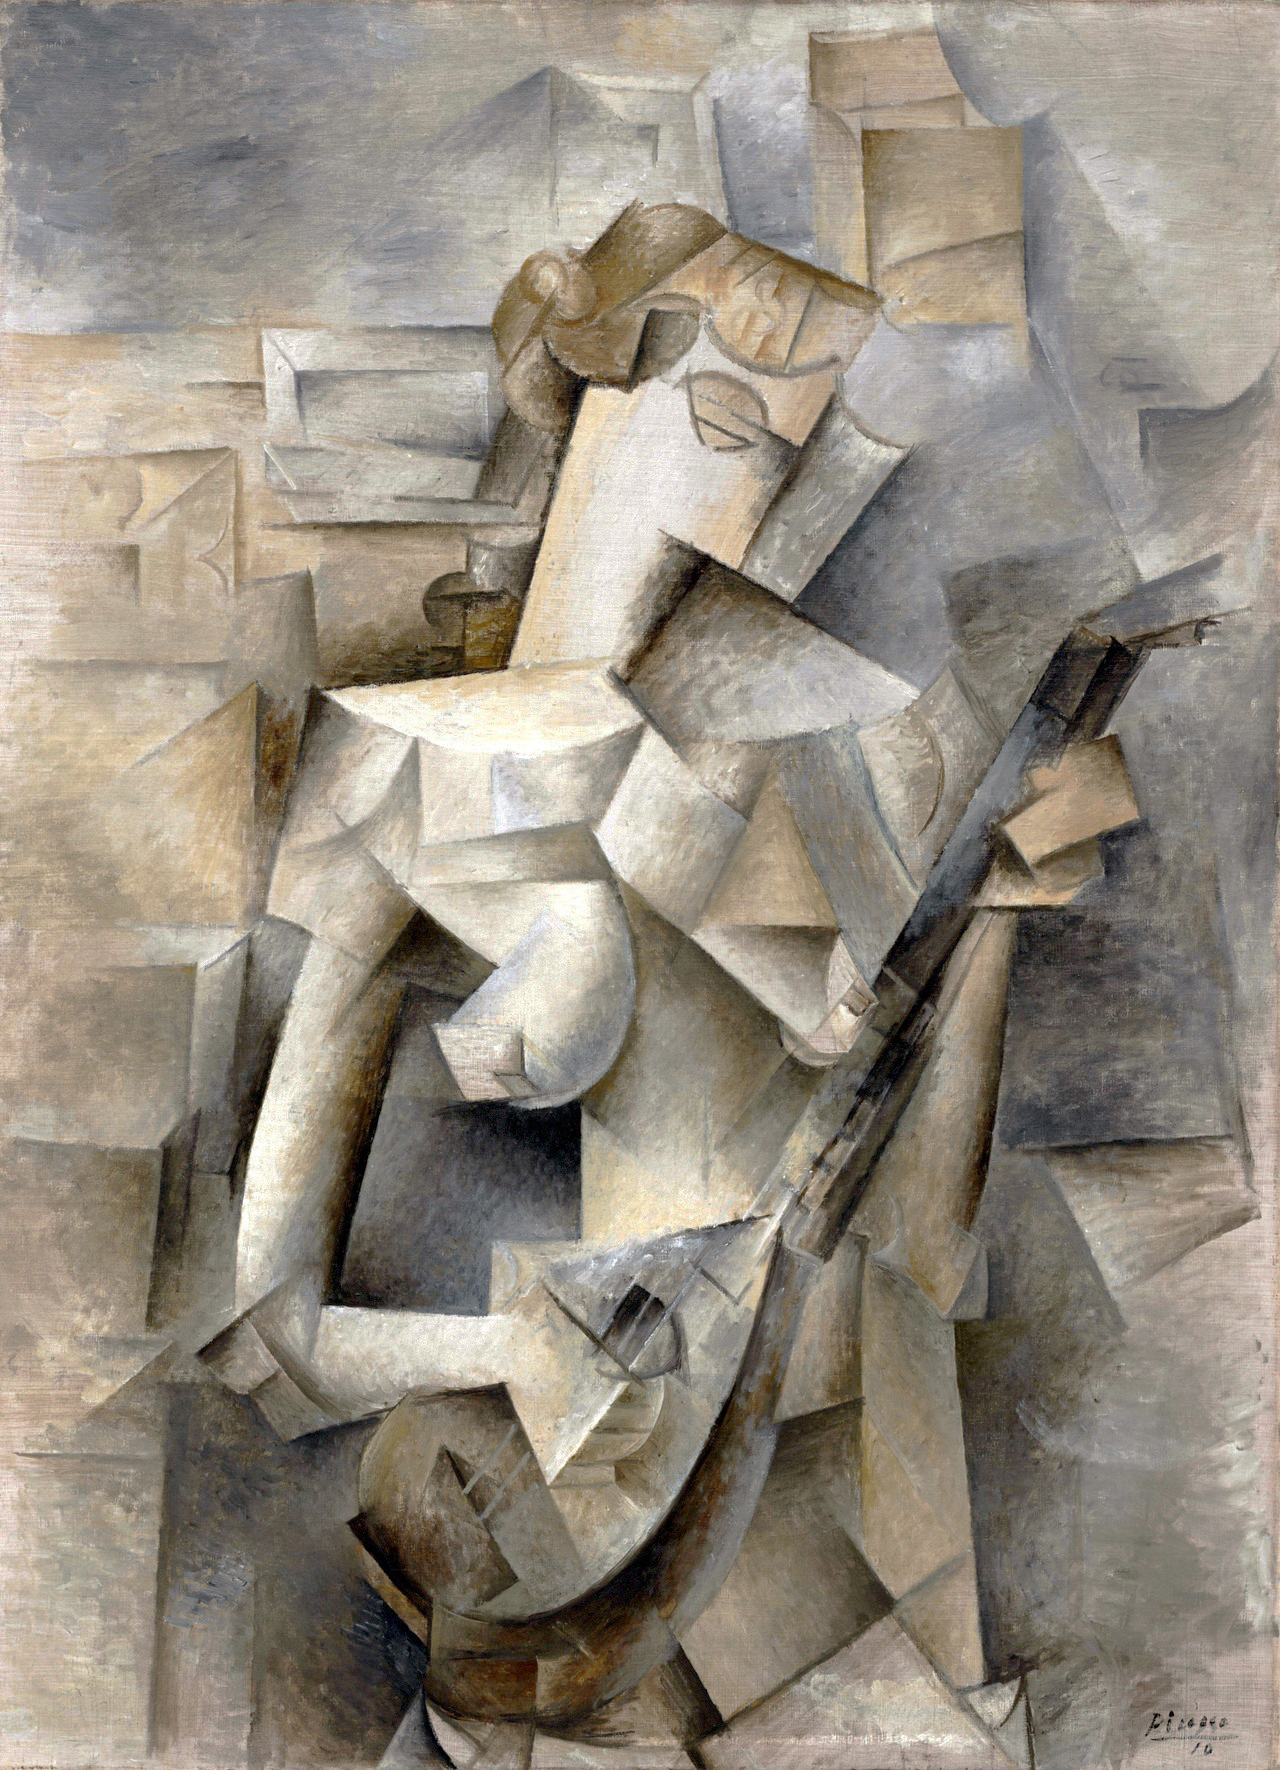 Pablo_Picasso%2C_1910%2C_Girl_with_a_Mandolin_%28Fanny_Tellier%29%2C_oil_on_canvas%2C_100.3_x_73.6_cm%2C_Museum_of_Modern_Art_New_York..jpg